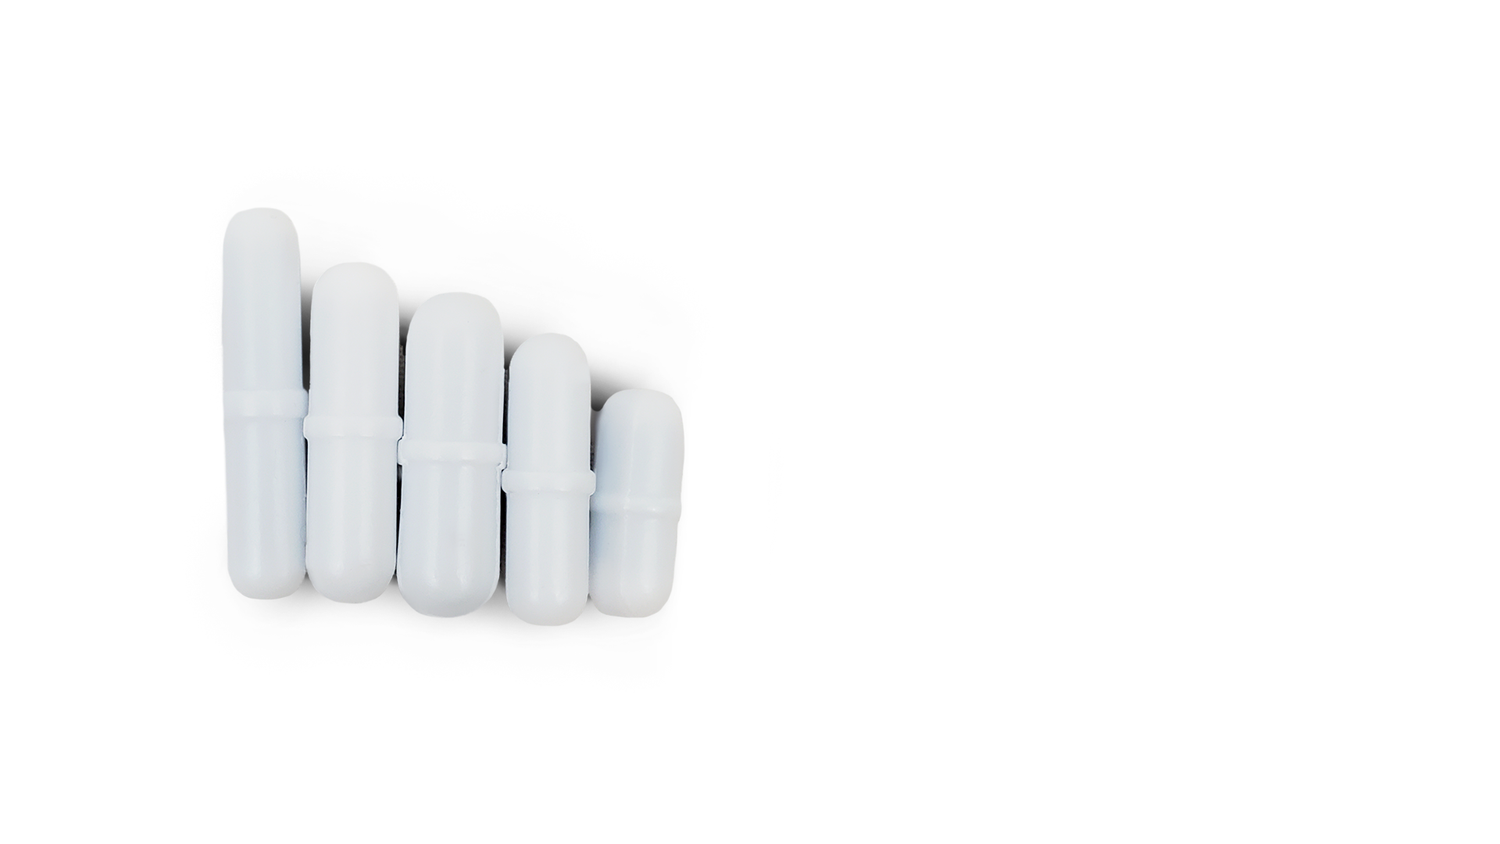 5 Piece Multi Size Magnetic Stir Bars in a Row